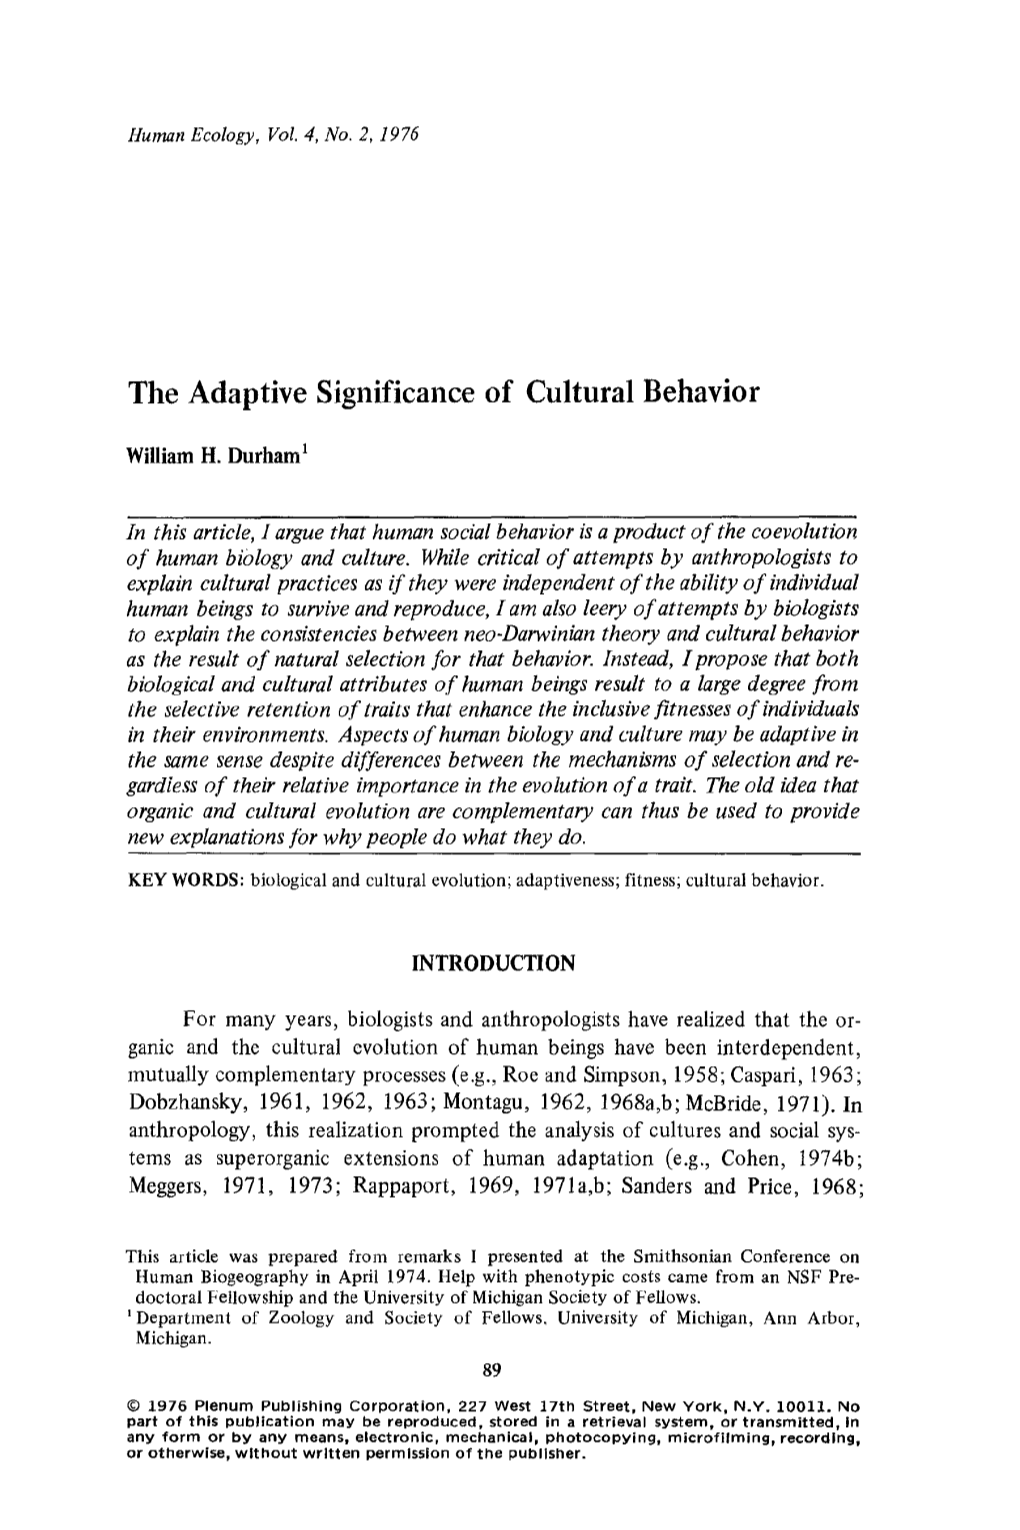 The Adaptive Significance of Cultural Behavior